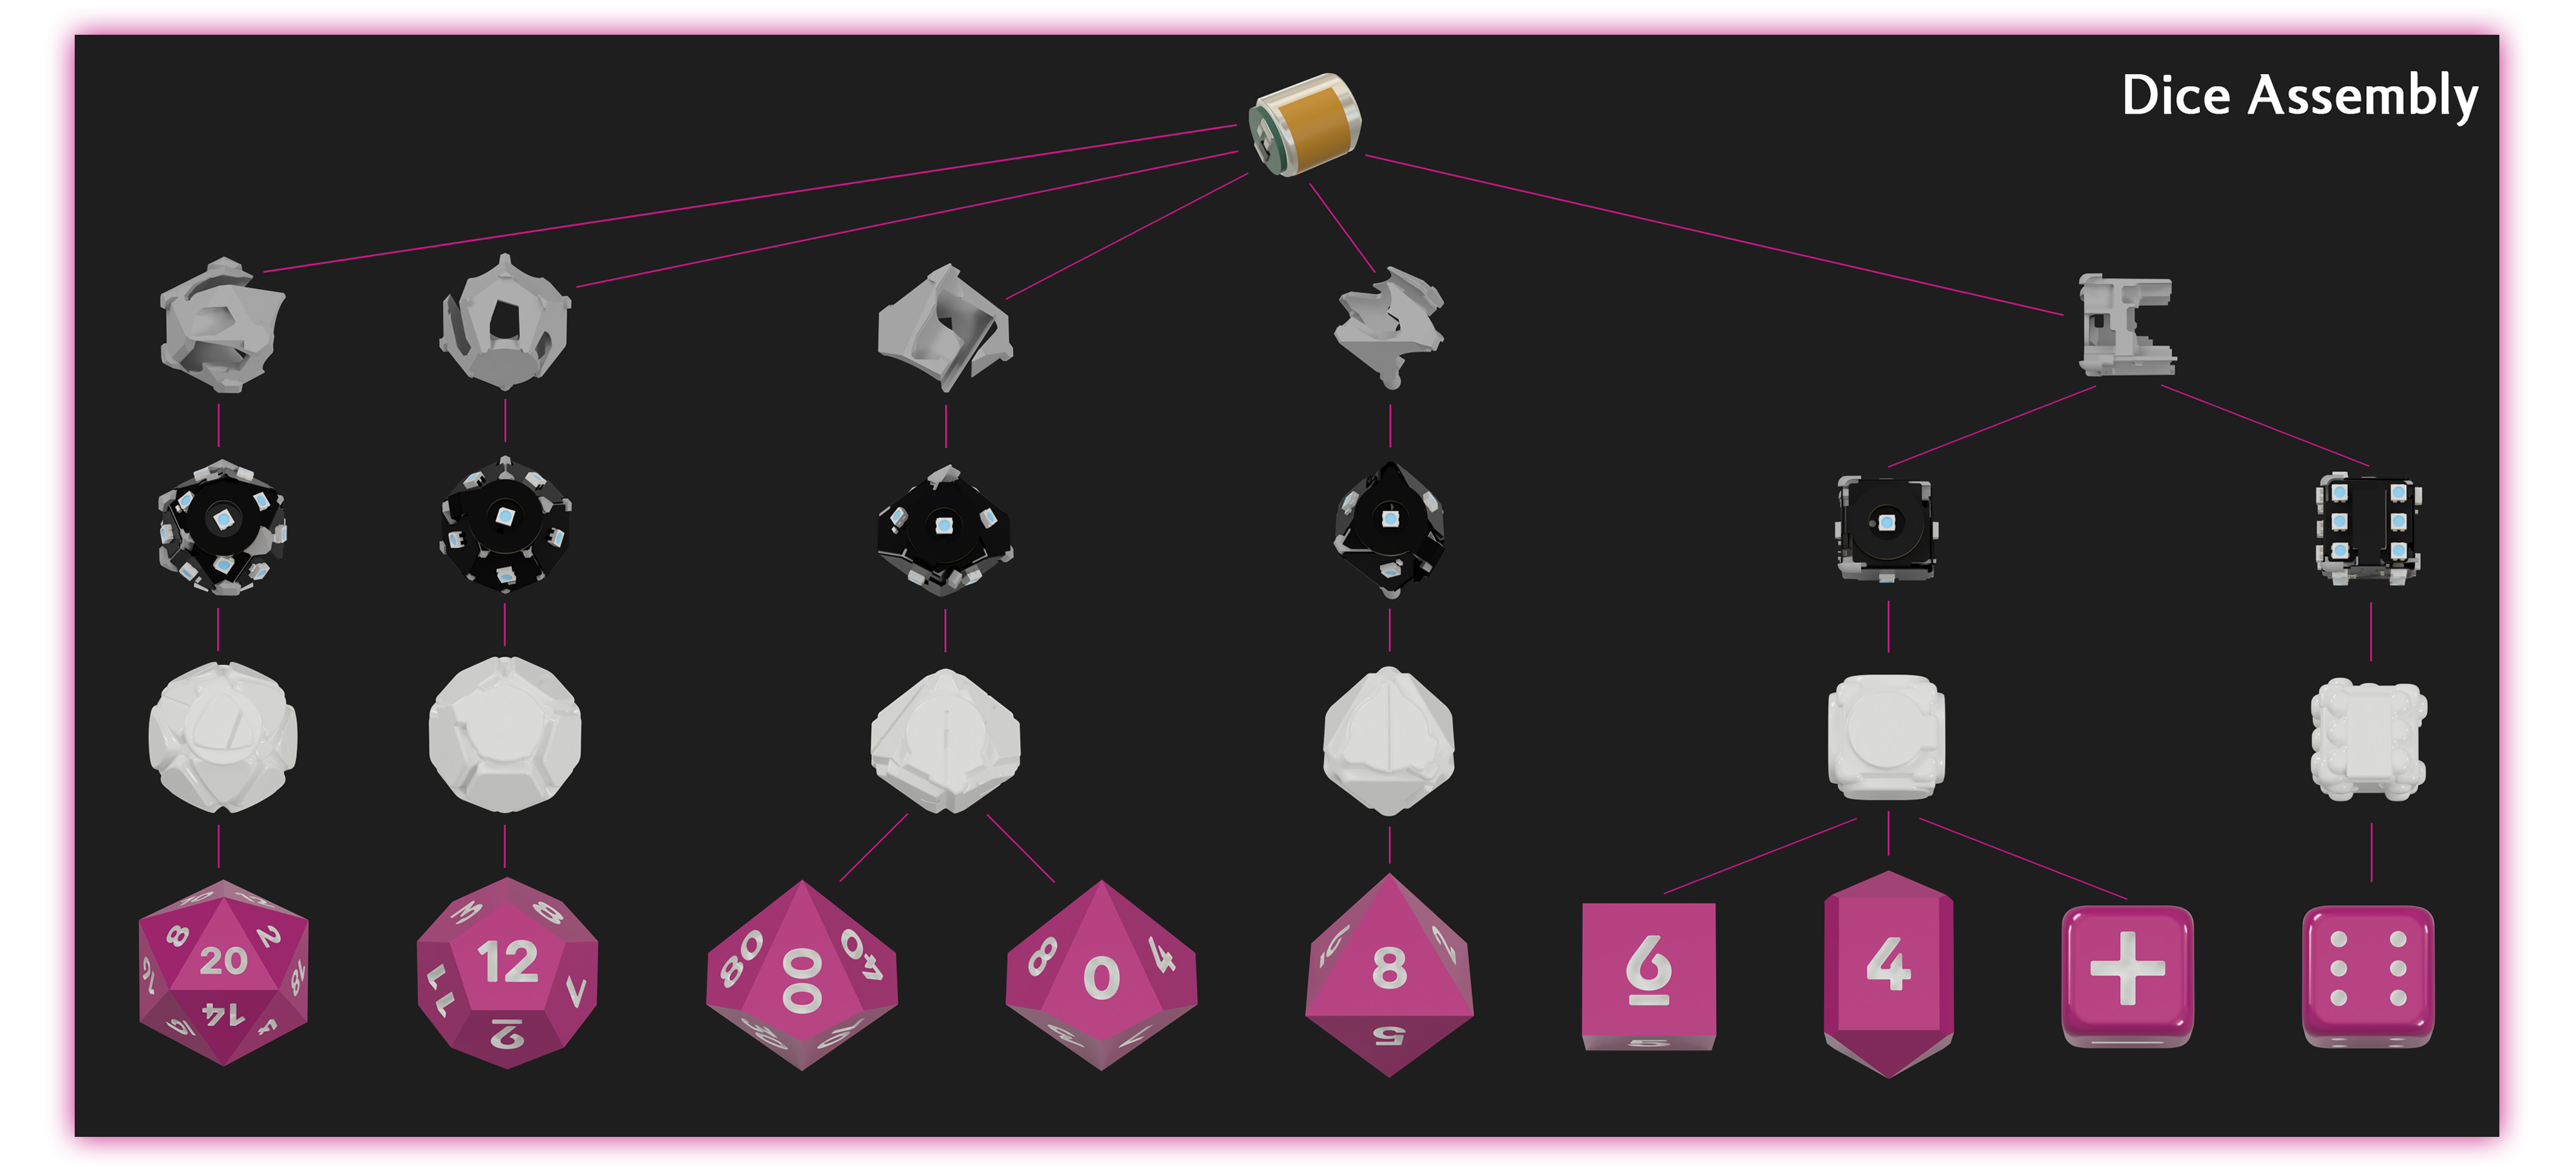 Diagram of Pixels Dice assembly displaying how different elements fit into each other.